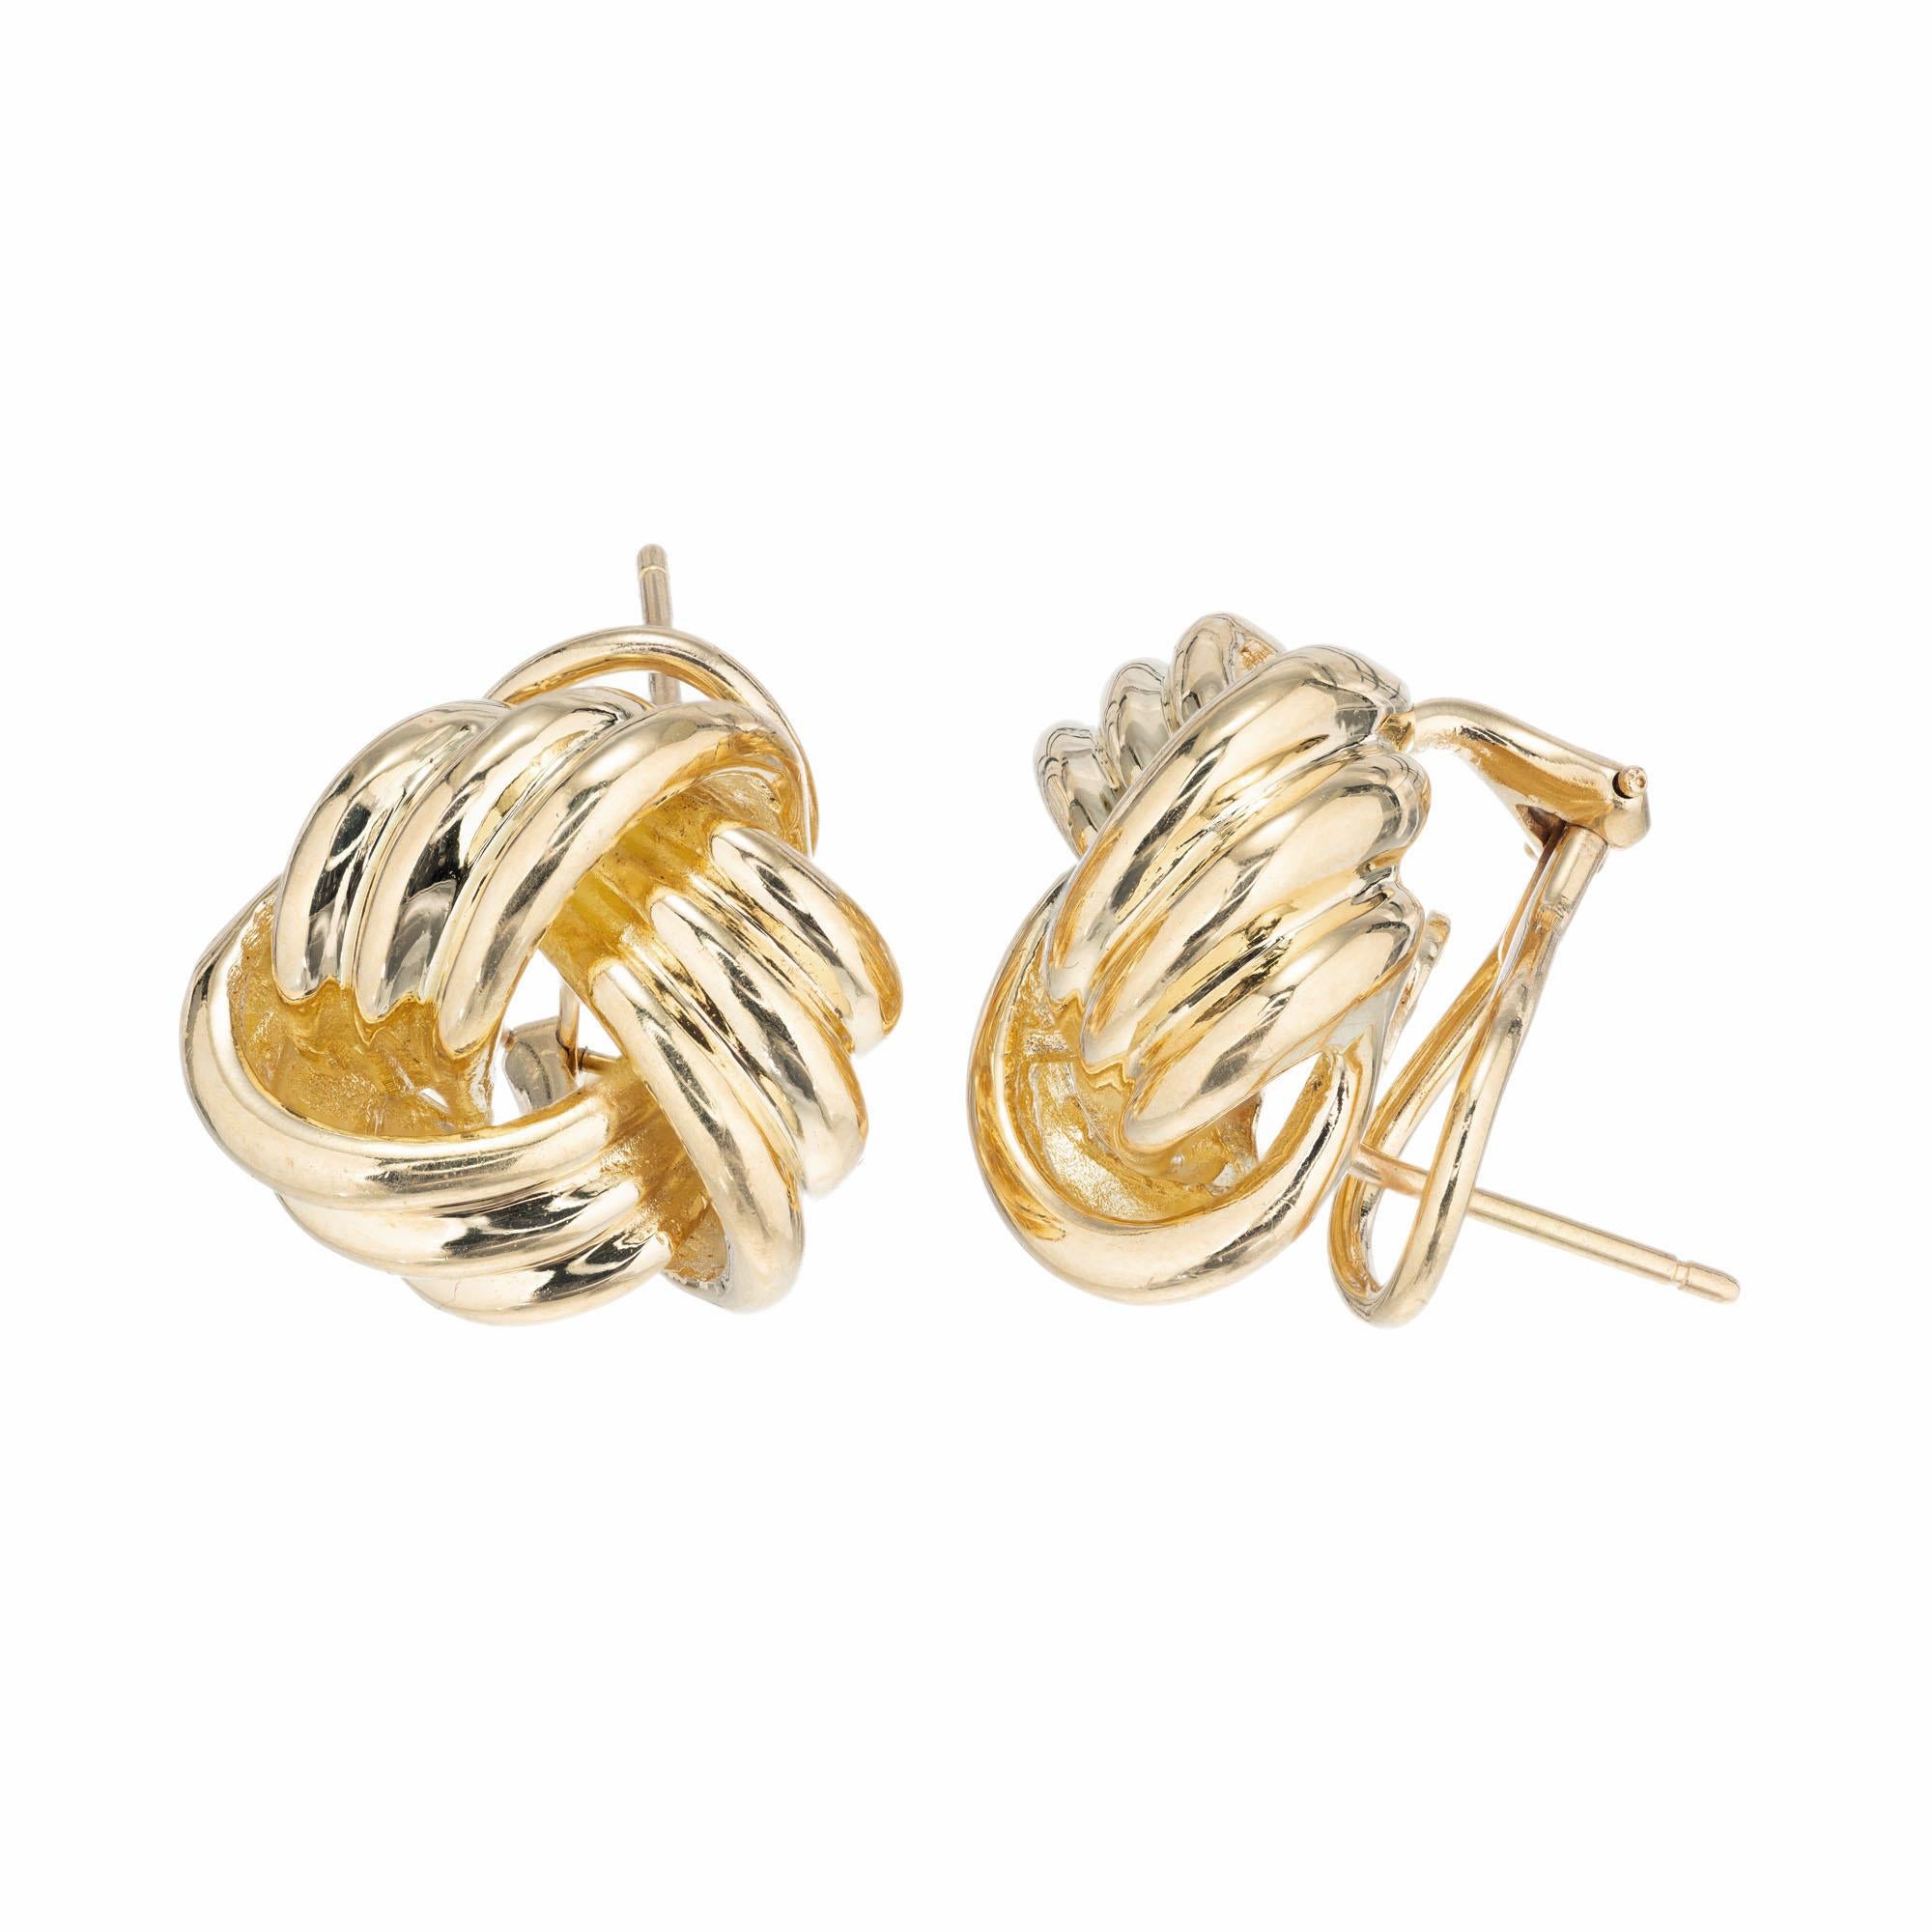 Classic Tiffany & Co clip post 18k yellow gold love knot earrings. Posts and earrings both stamped Tiffany 750

18k yellow gold 
Stamped: 18k 750
Hallmark: Tiffany + Co
14.8 grams
Top to bottom: 18.1mm or 11/16 Inch
Width: 17.3mm or 11/16 Inch
Depth